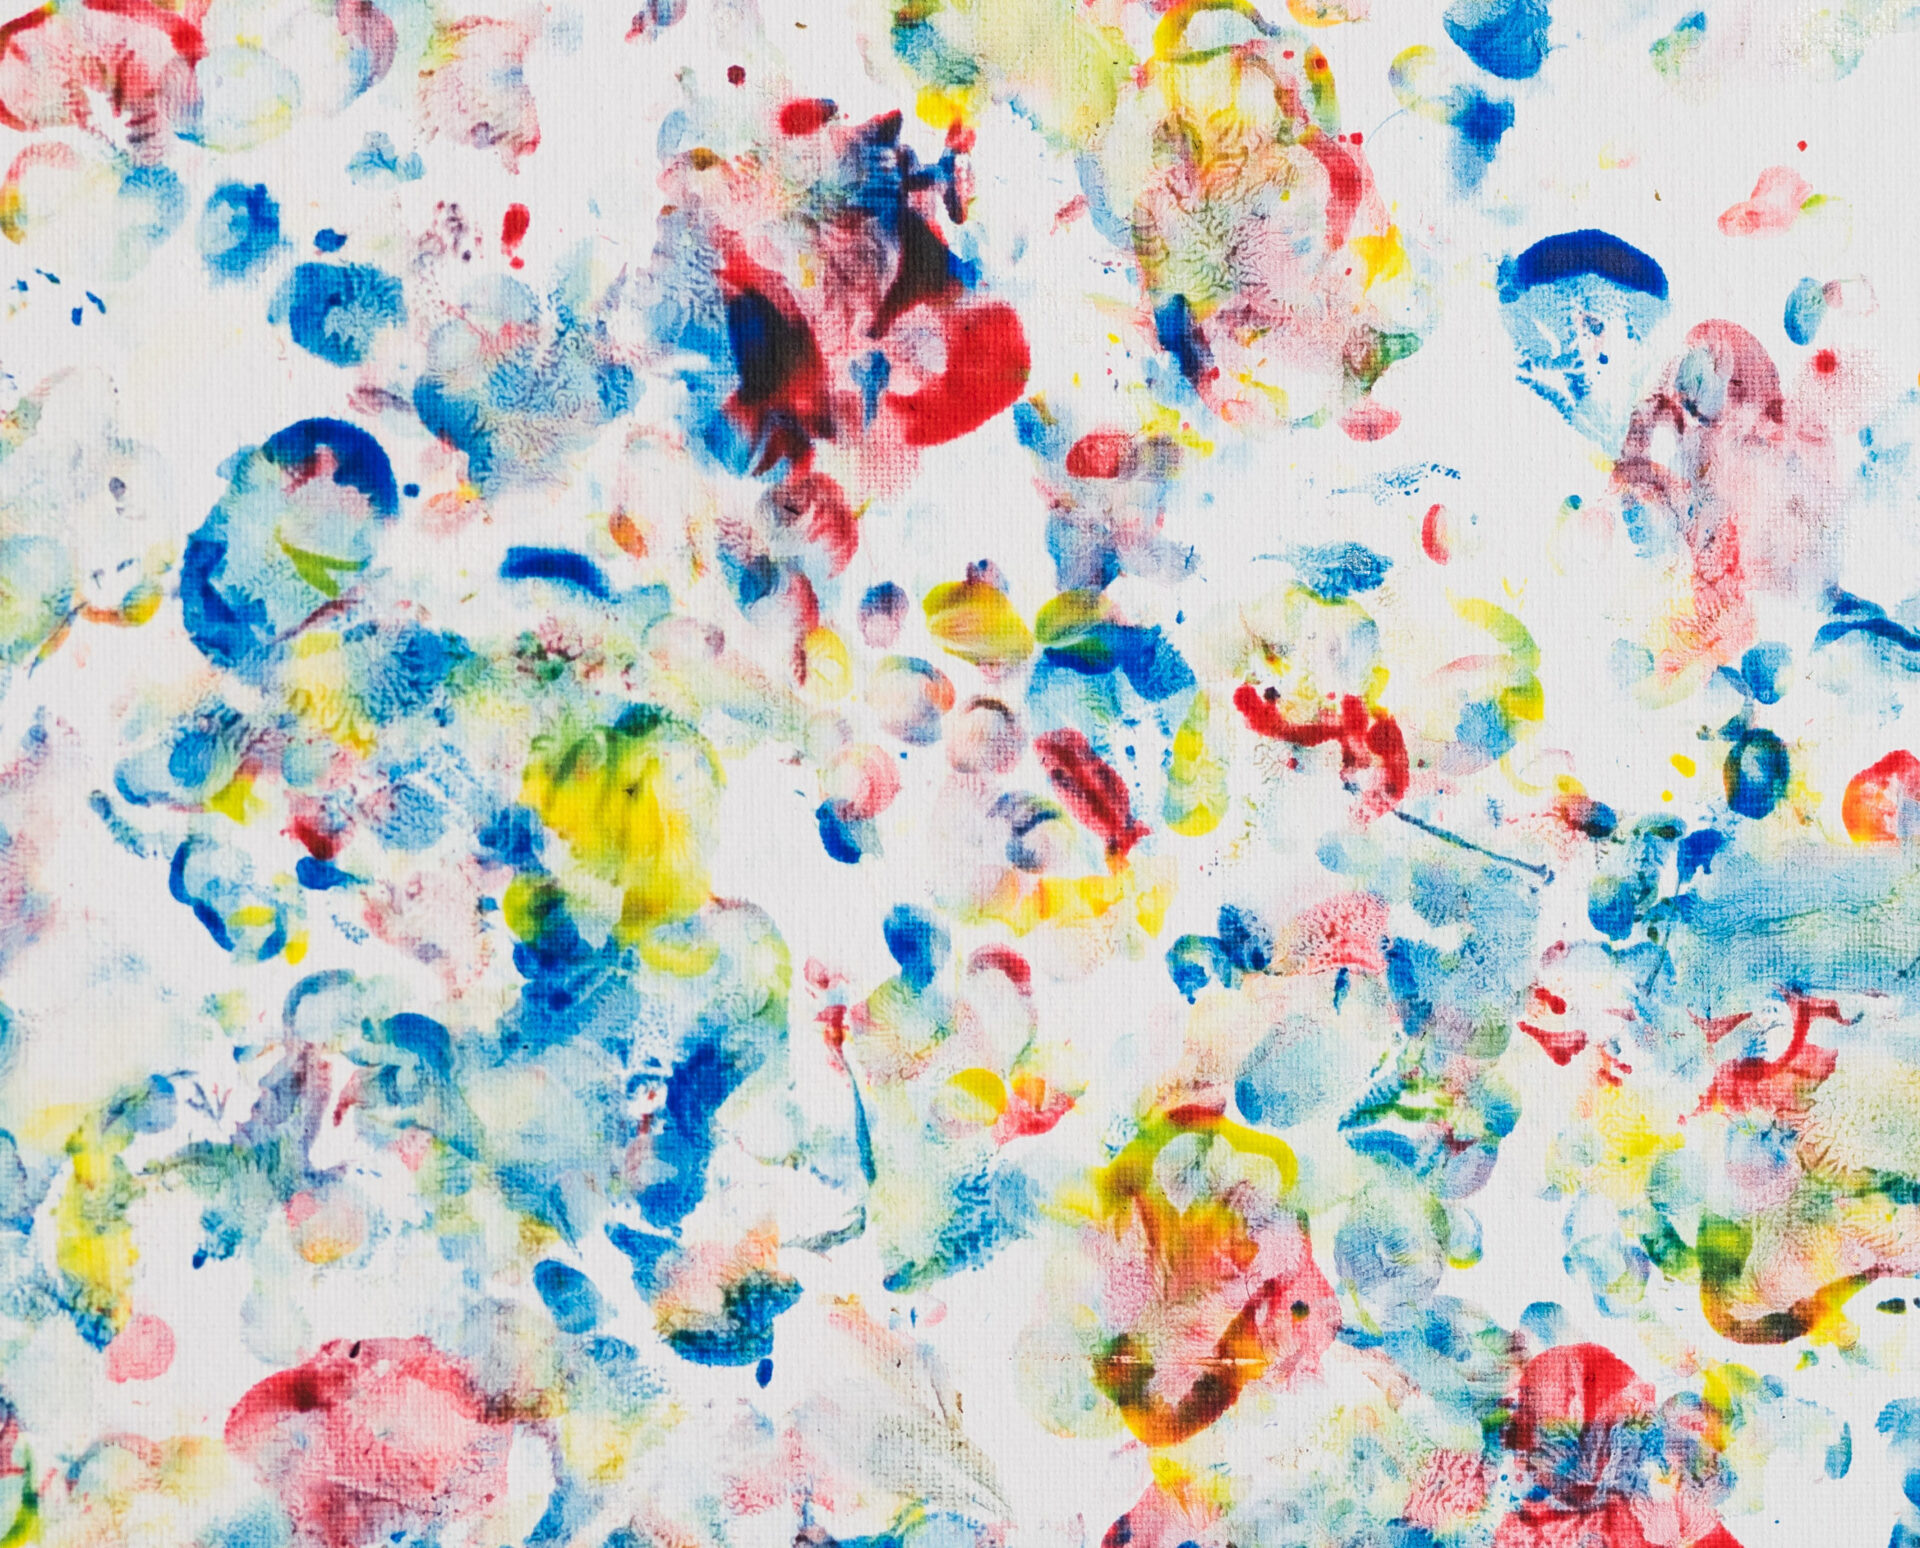 blue, red, and yellow patches of paint on a white background